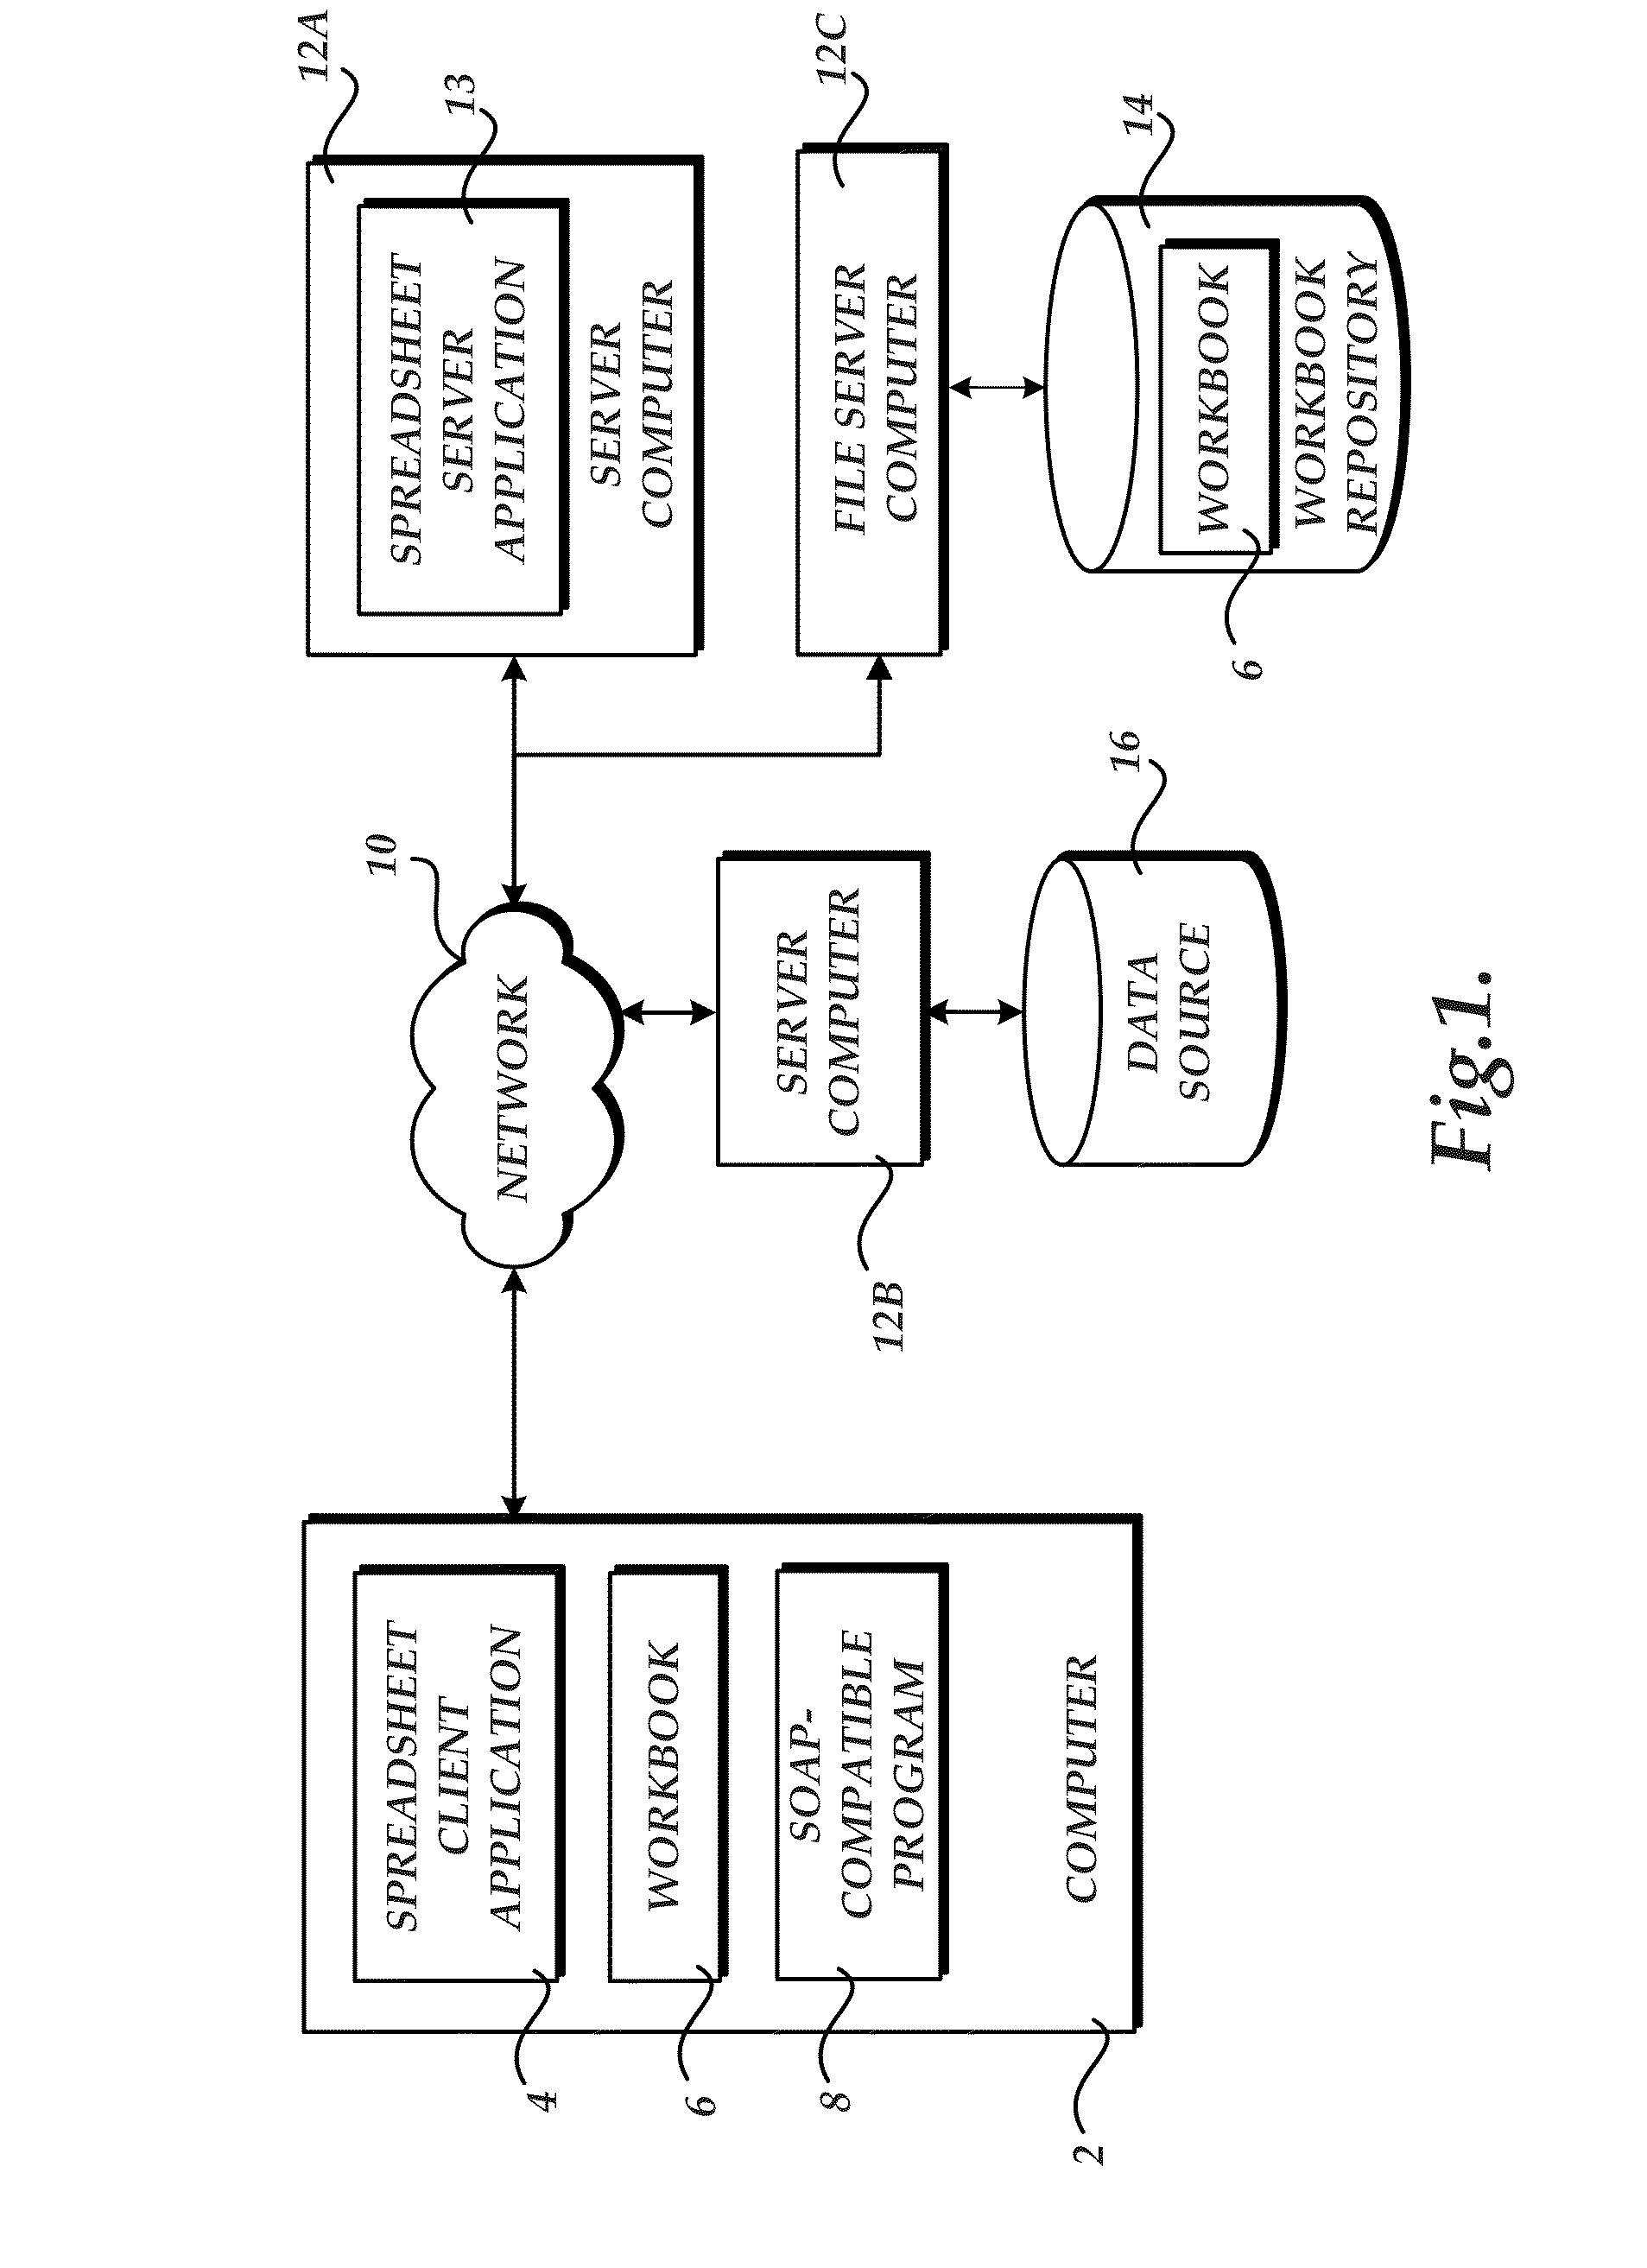 Method, System, and Apparatus for Providing Access to Workbook Models Through Remote Function Calls